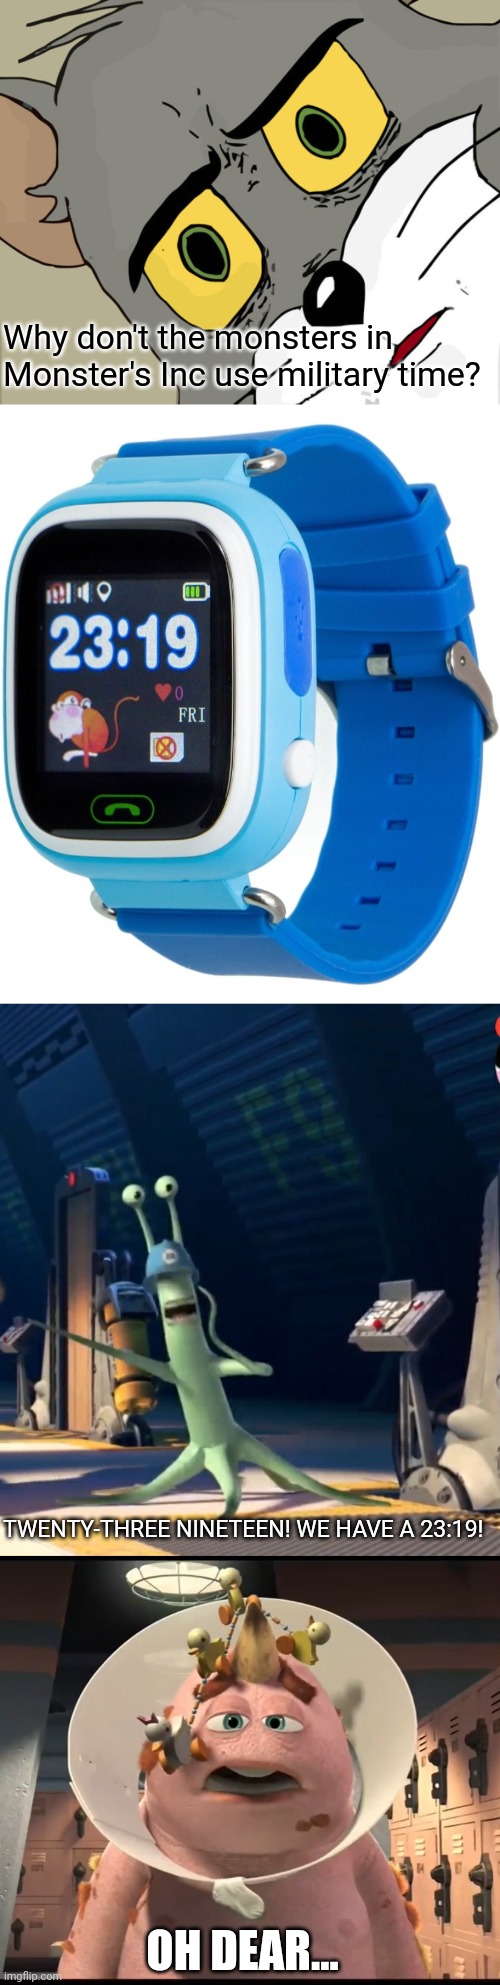 This is what happens when your codes match times on a watch... | Why don't the monsters in Monster's Inc use military time? TWENTY-THREE NINETEEN! WE HAVE A 23:19! OH DEAR... | image tagged in memes,unsettled tom,monsters inc,2319,military time,24 hour clock | made w/ Imgflip meme maker